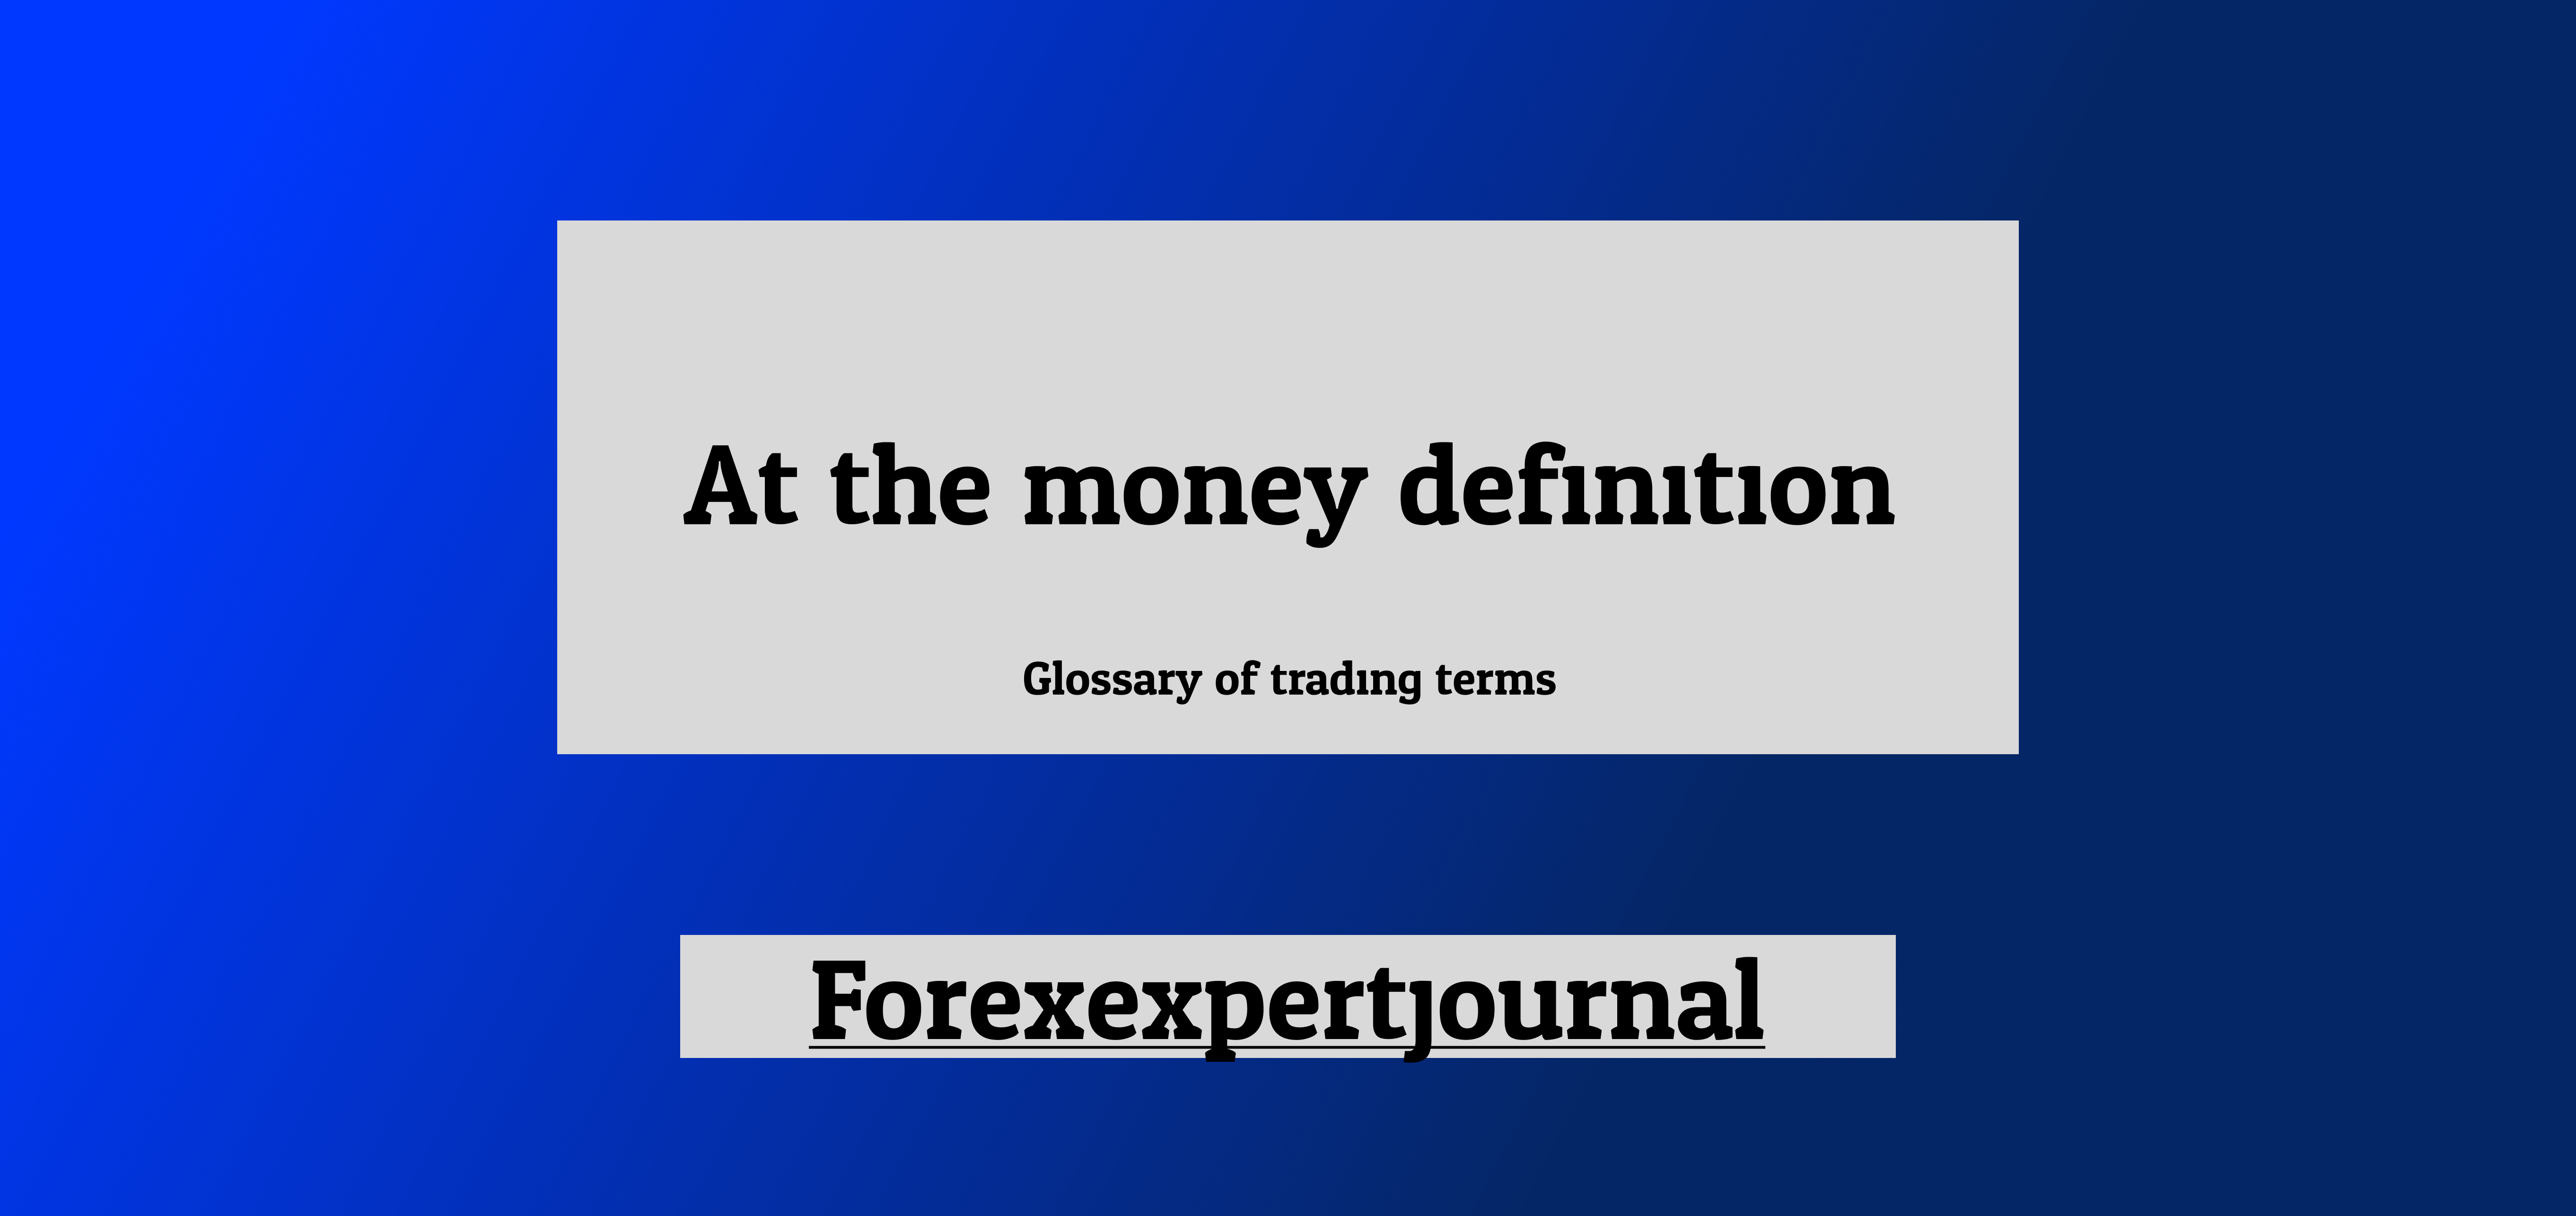 At the money definition